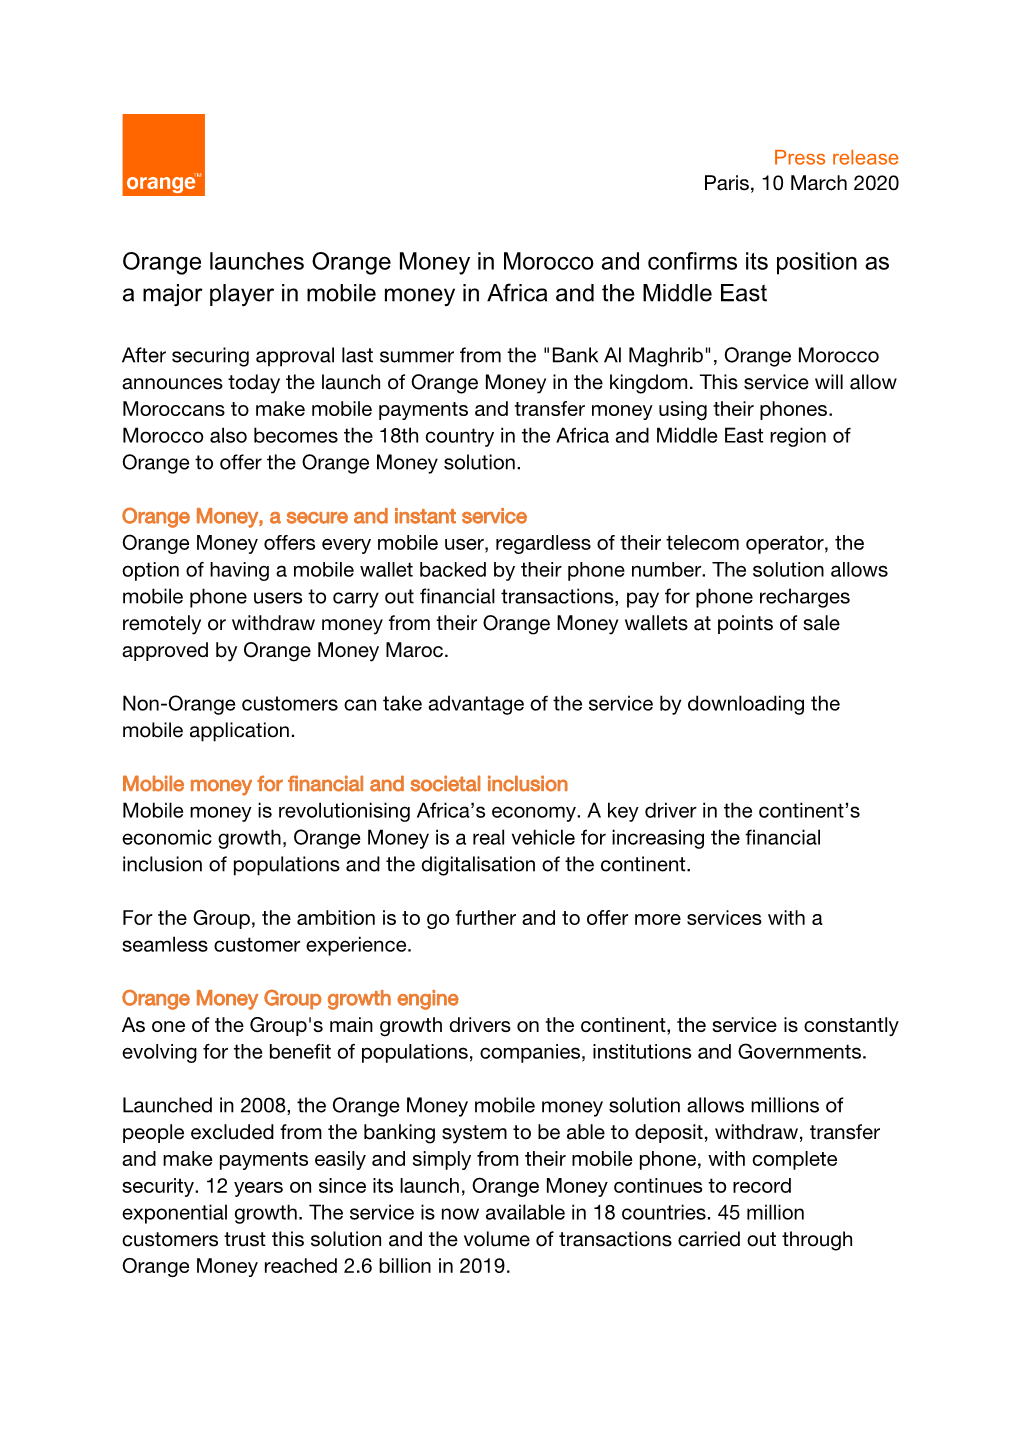 Orange Launches Orange Money in Morocco and Confirms Its Position As a Major Player in Mobile Money in Africa and the Middle East